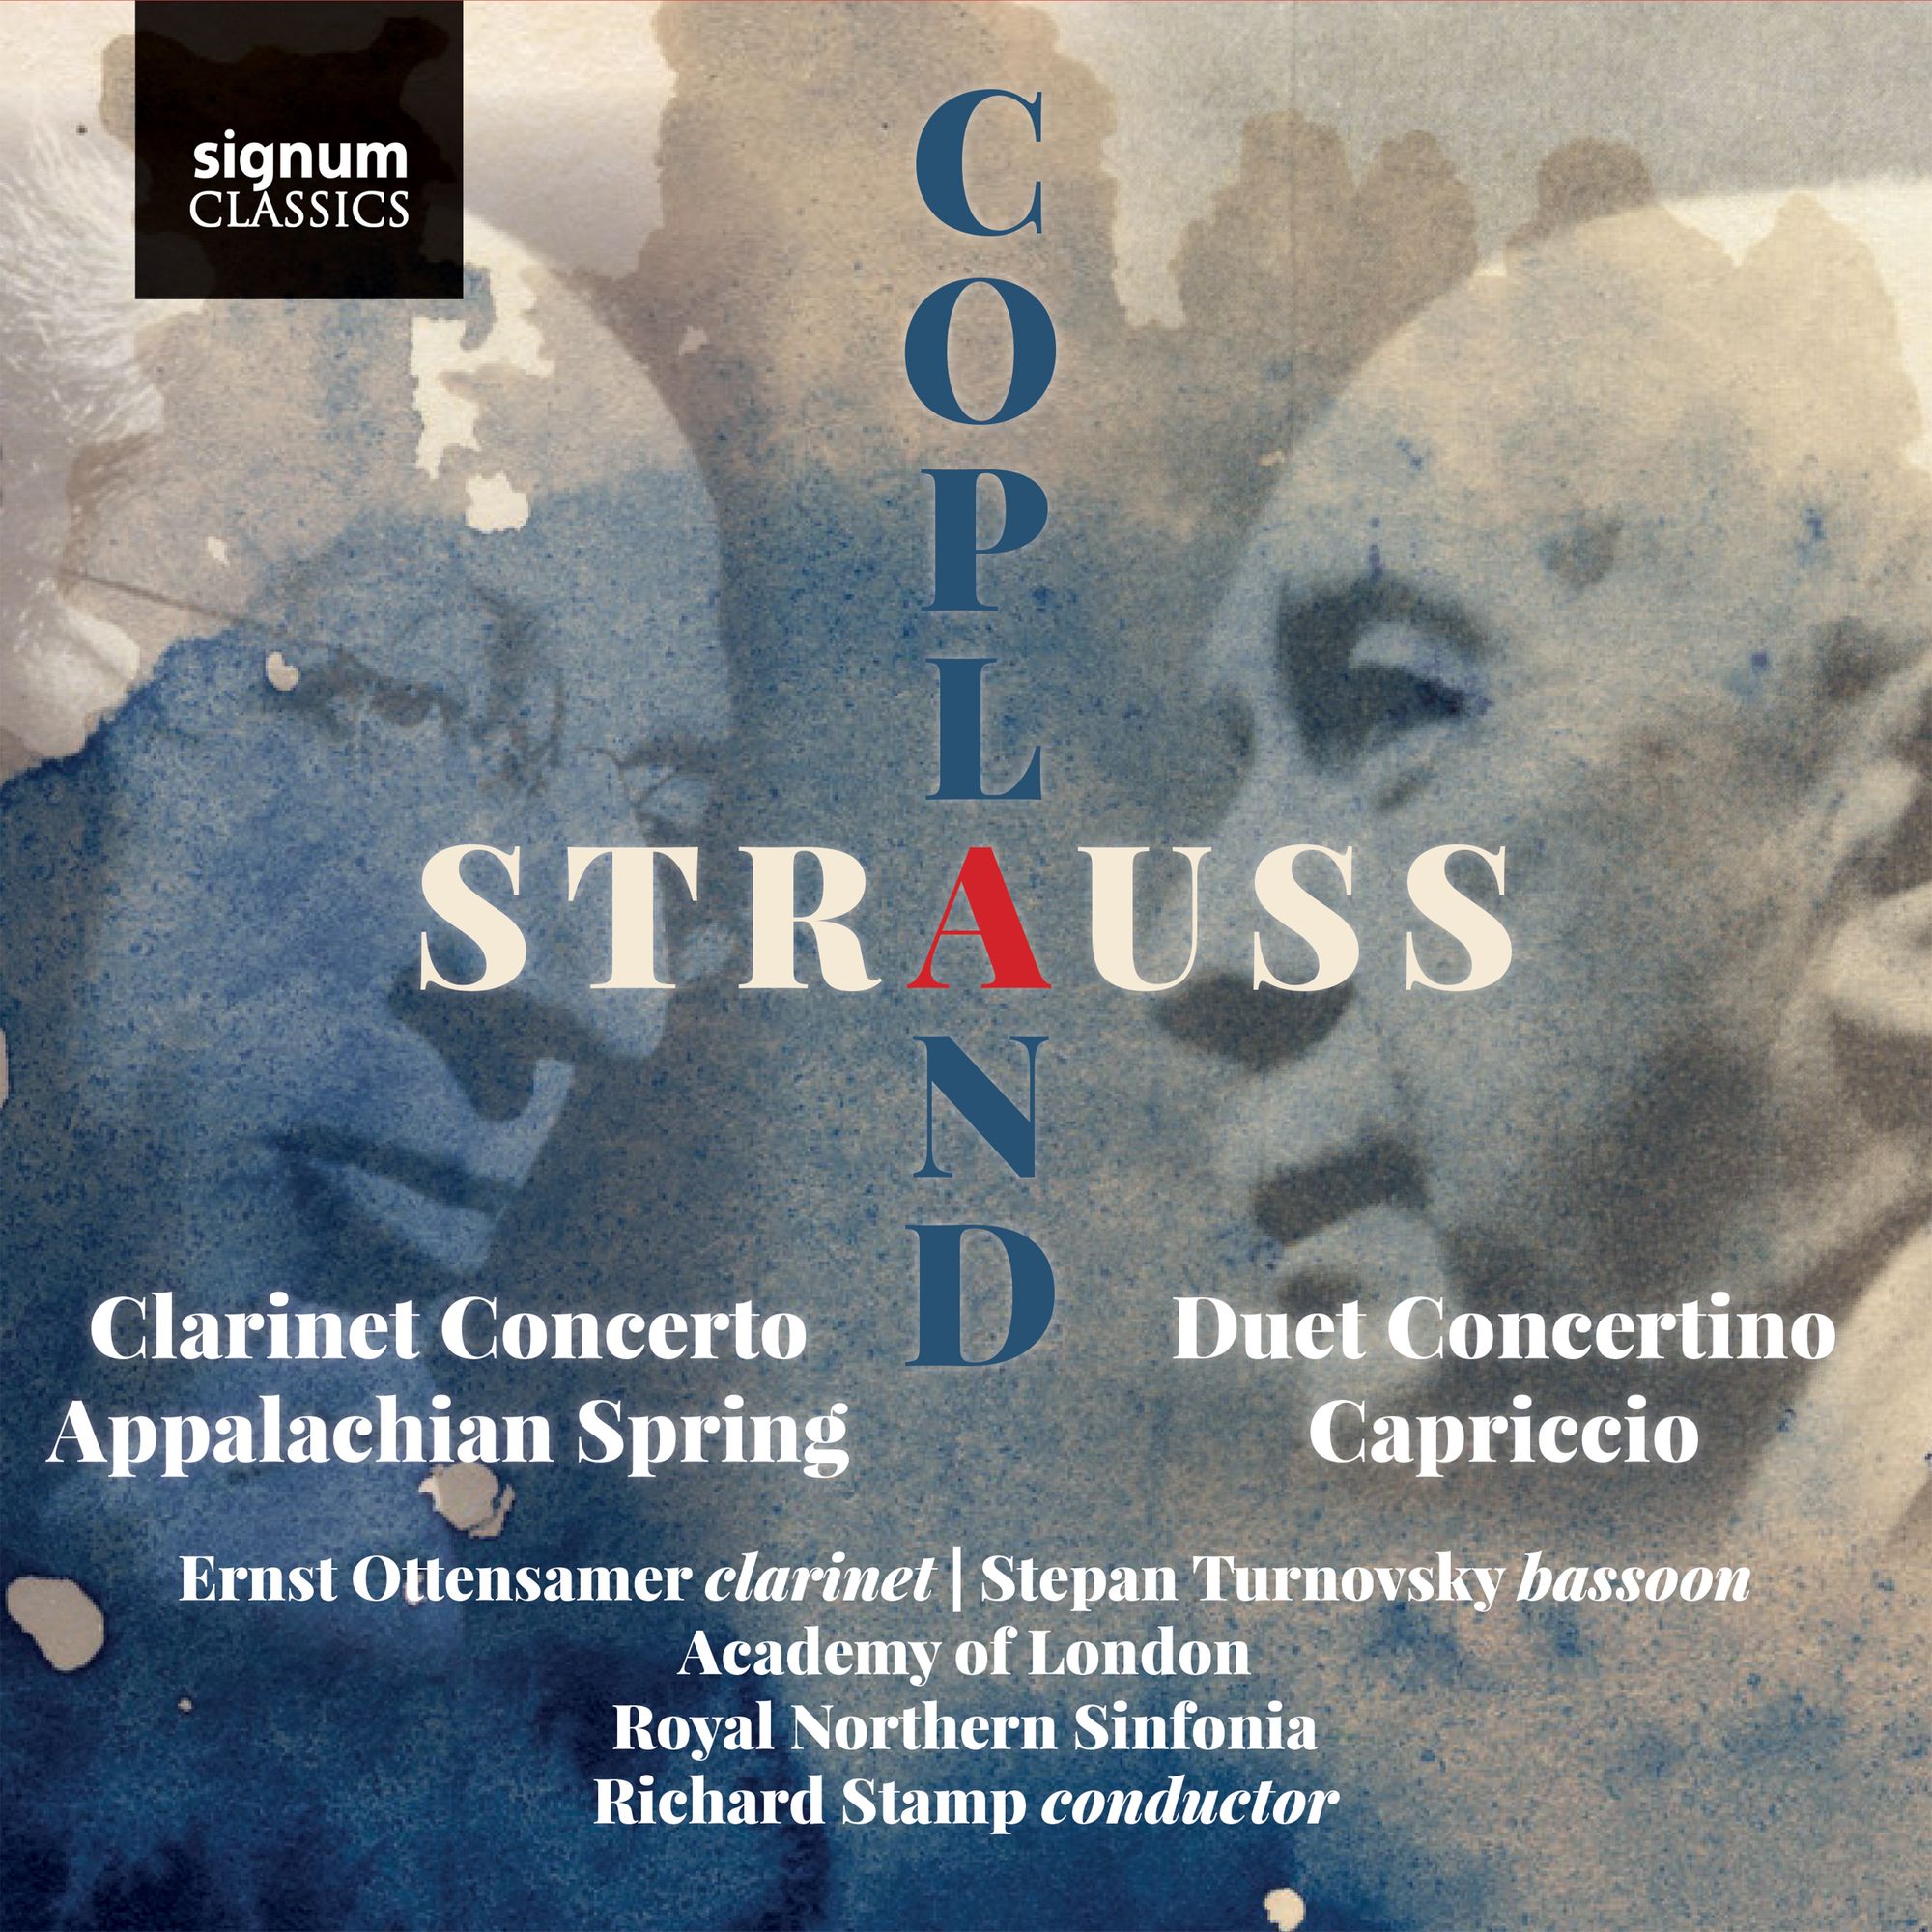 Conductor Richard Stamp in interview: Copland and Strauss